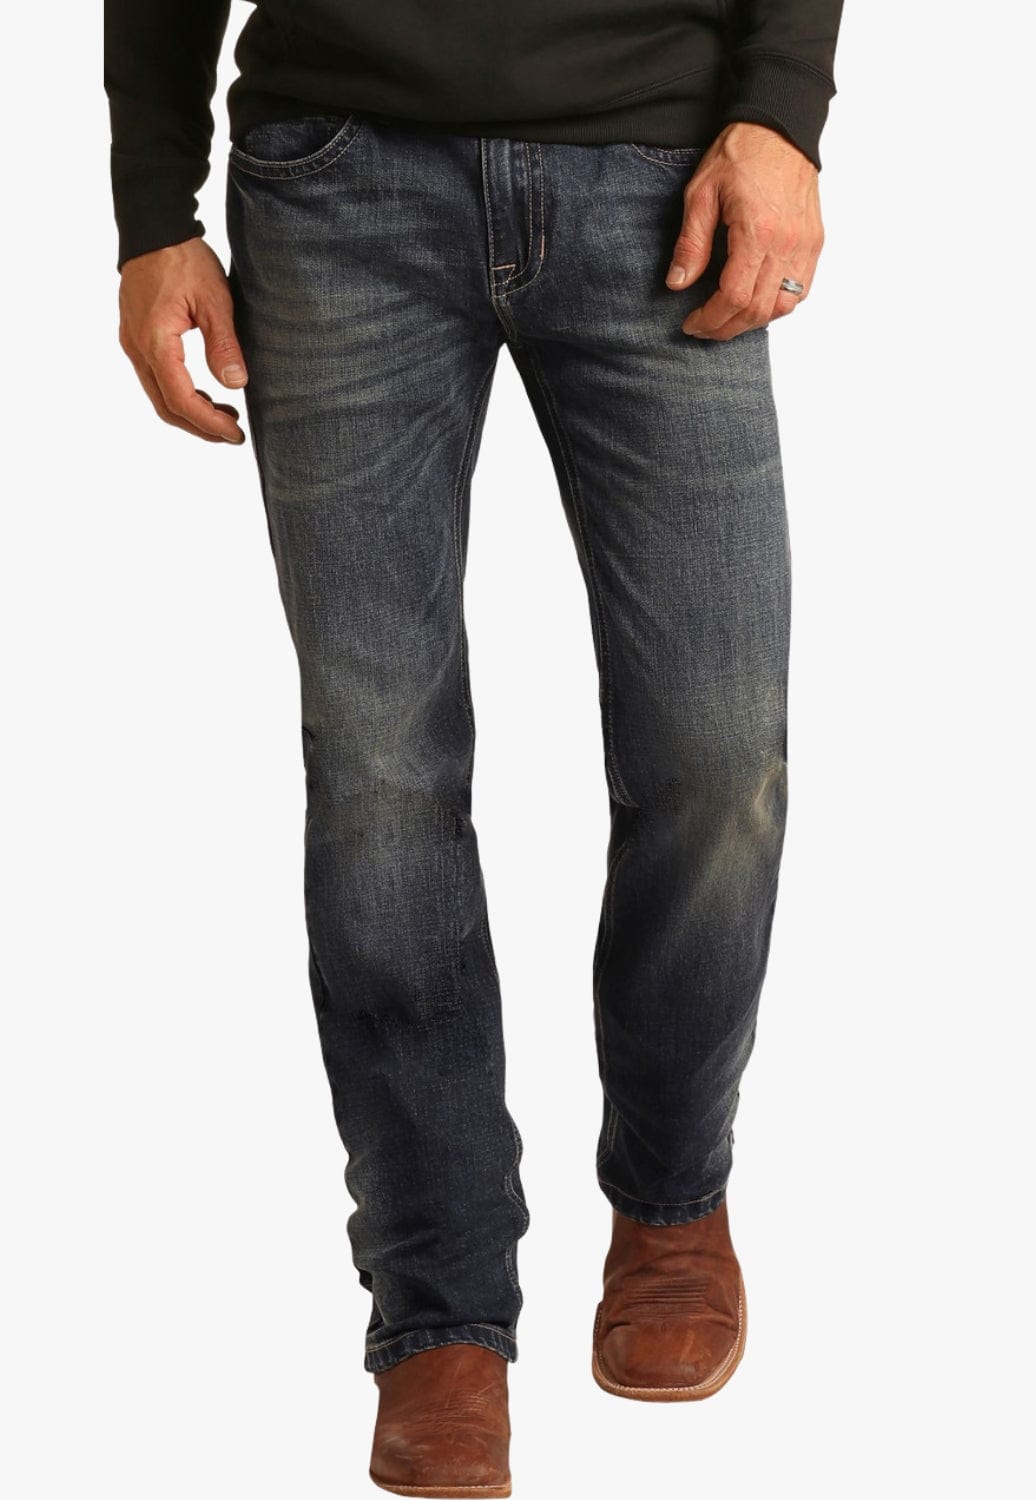 Rock and Roll CLOTHING-Mens Jeans Rock and Roll Mens Revolver Jean